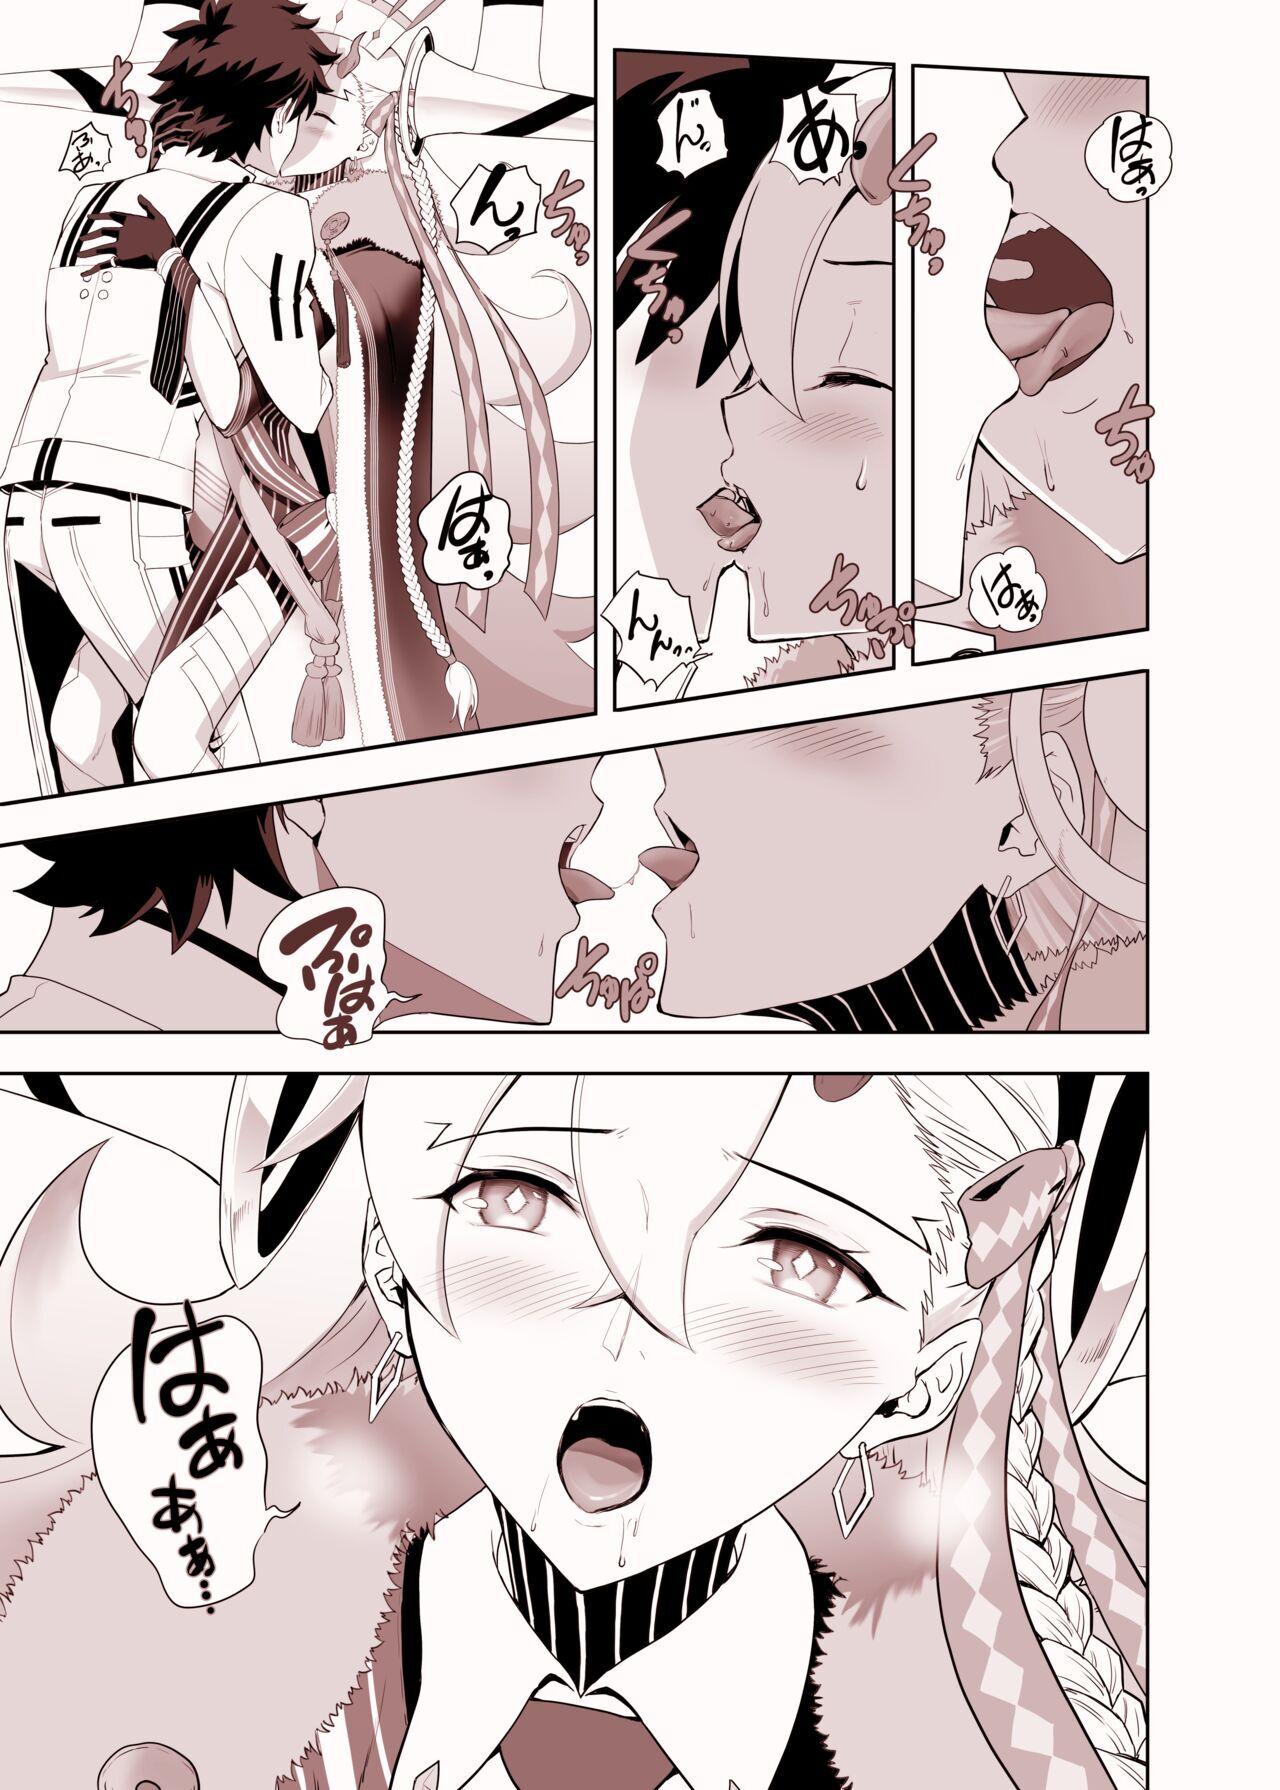 Nalgas Lovely U - Fate grand order Assfucked - Page 5